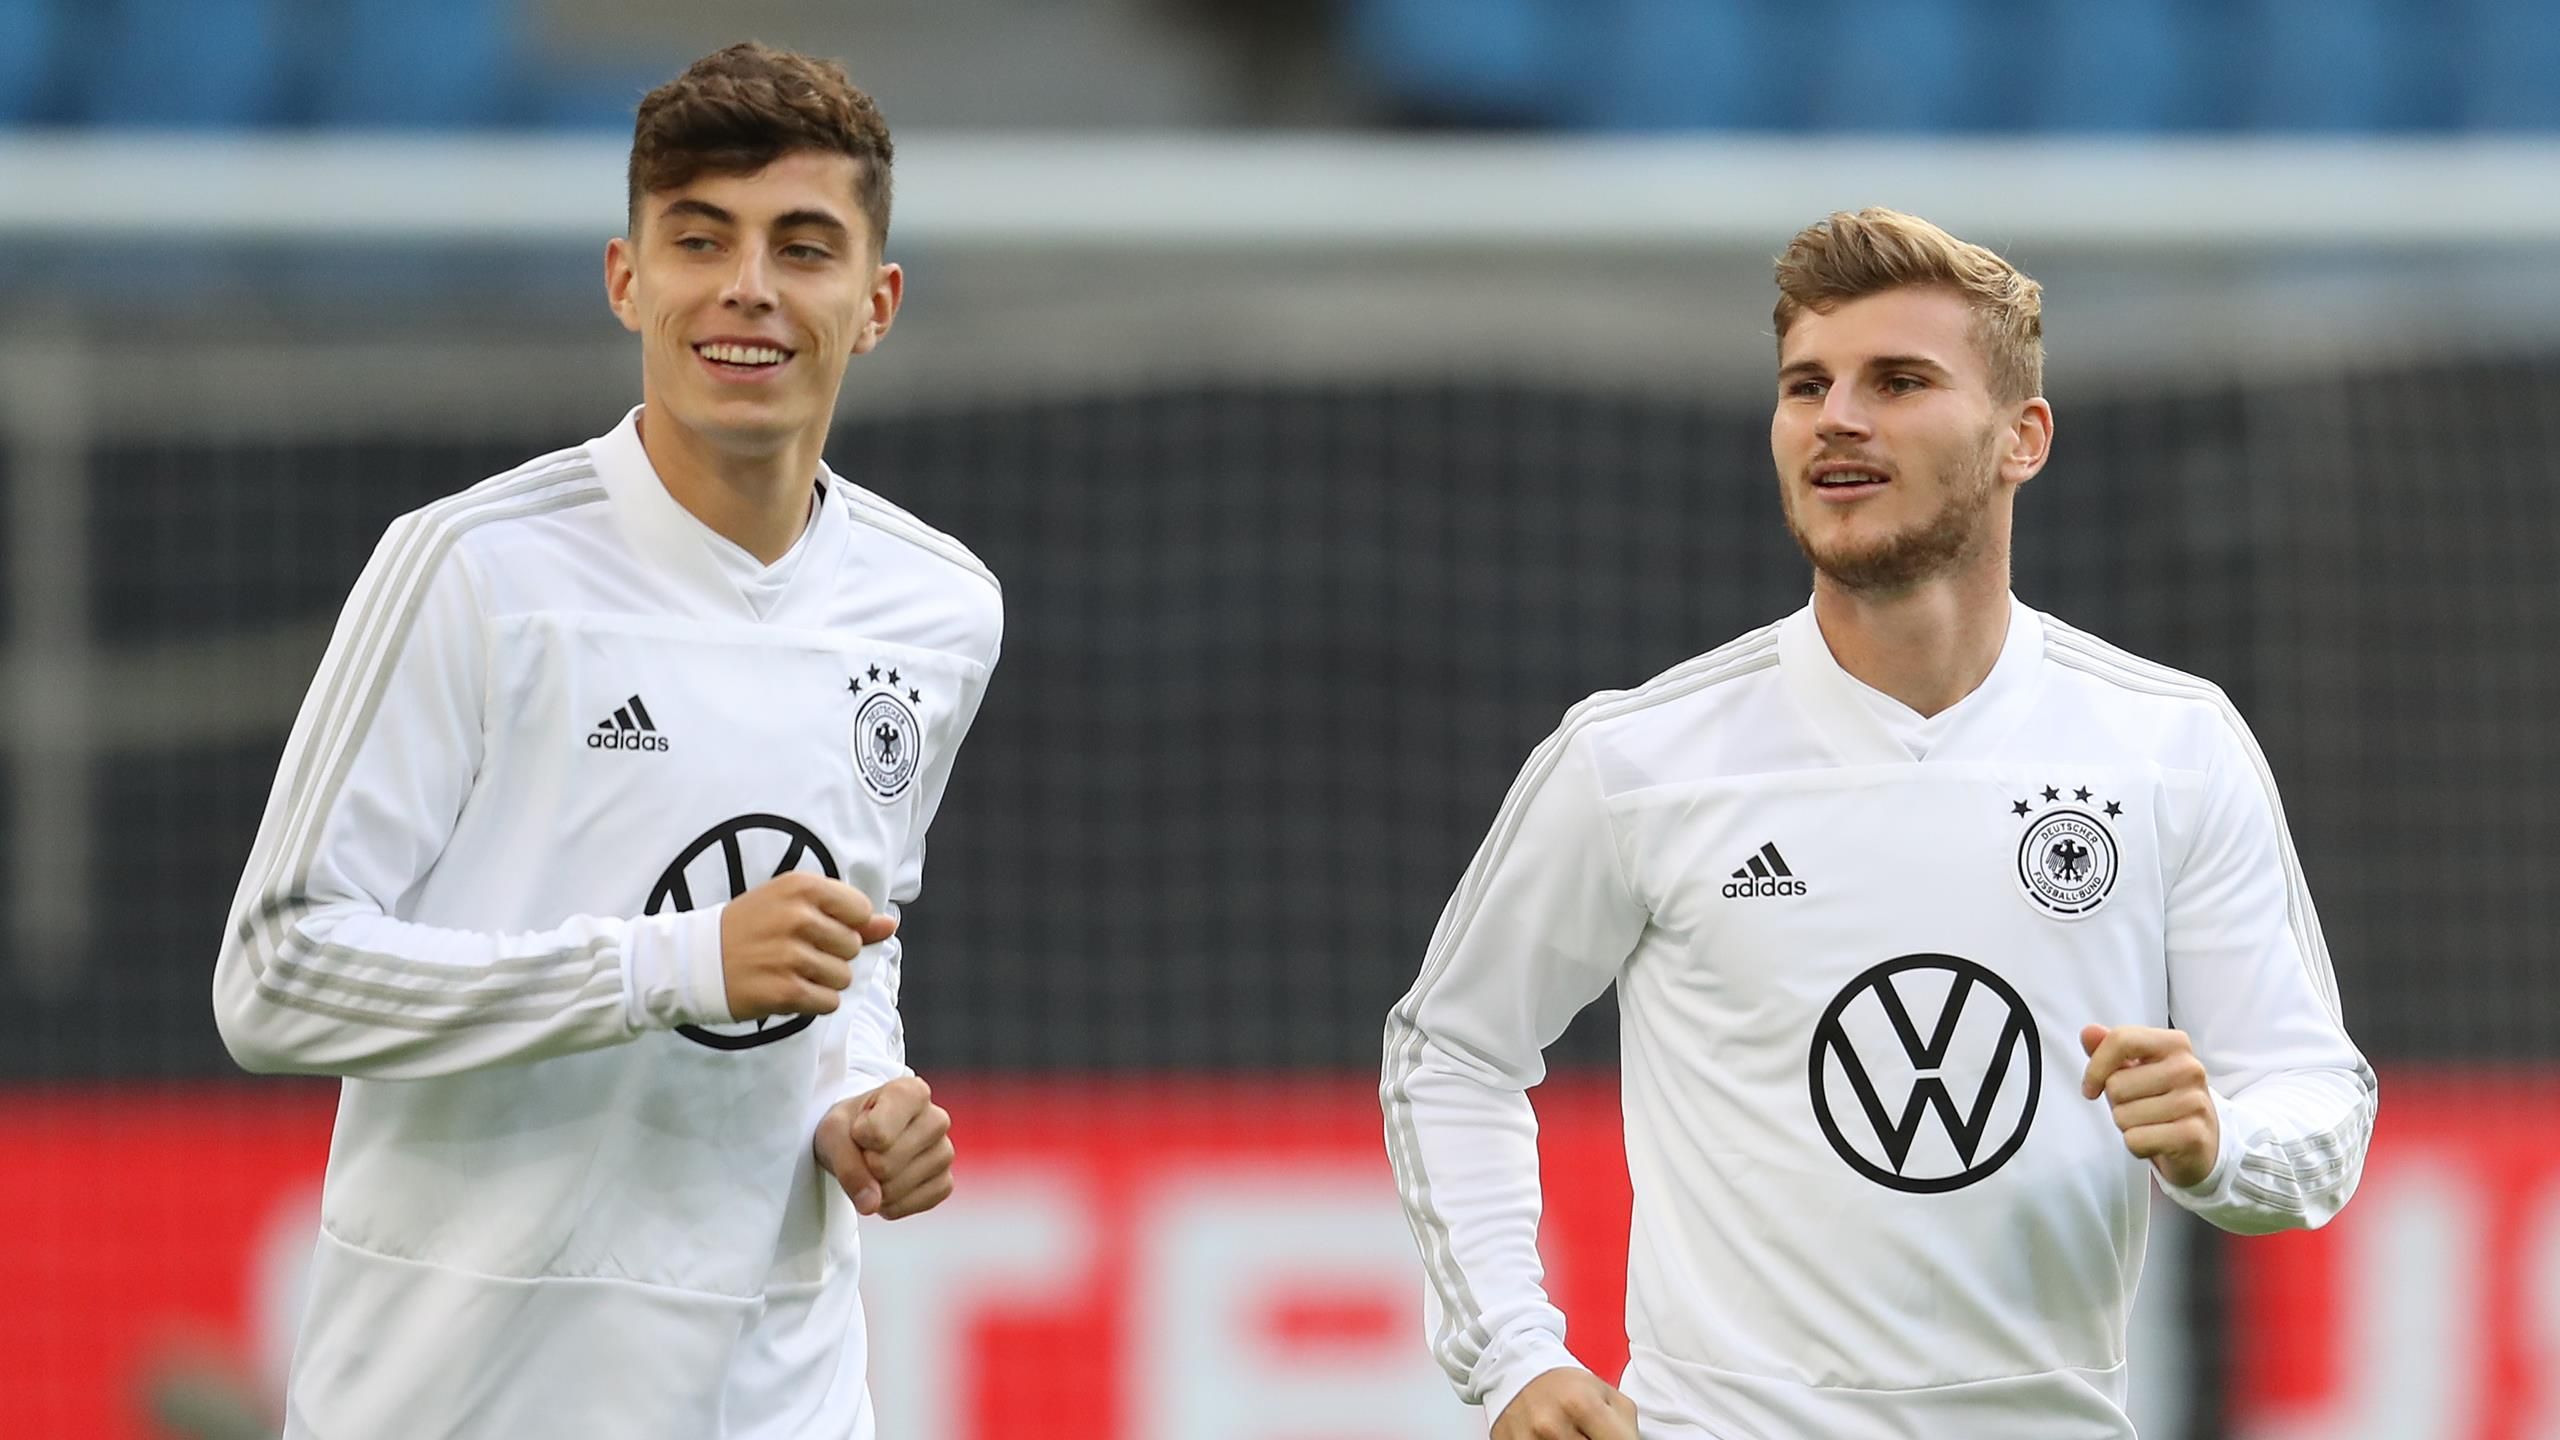 Football news, transfer rumours, gossip go 'all out' to pair Kai Havertz with Timo Werner